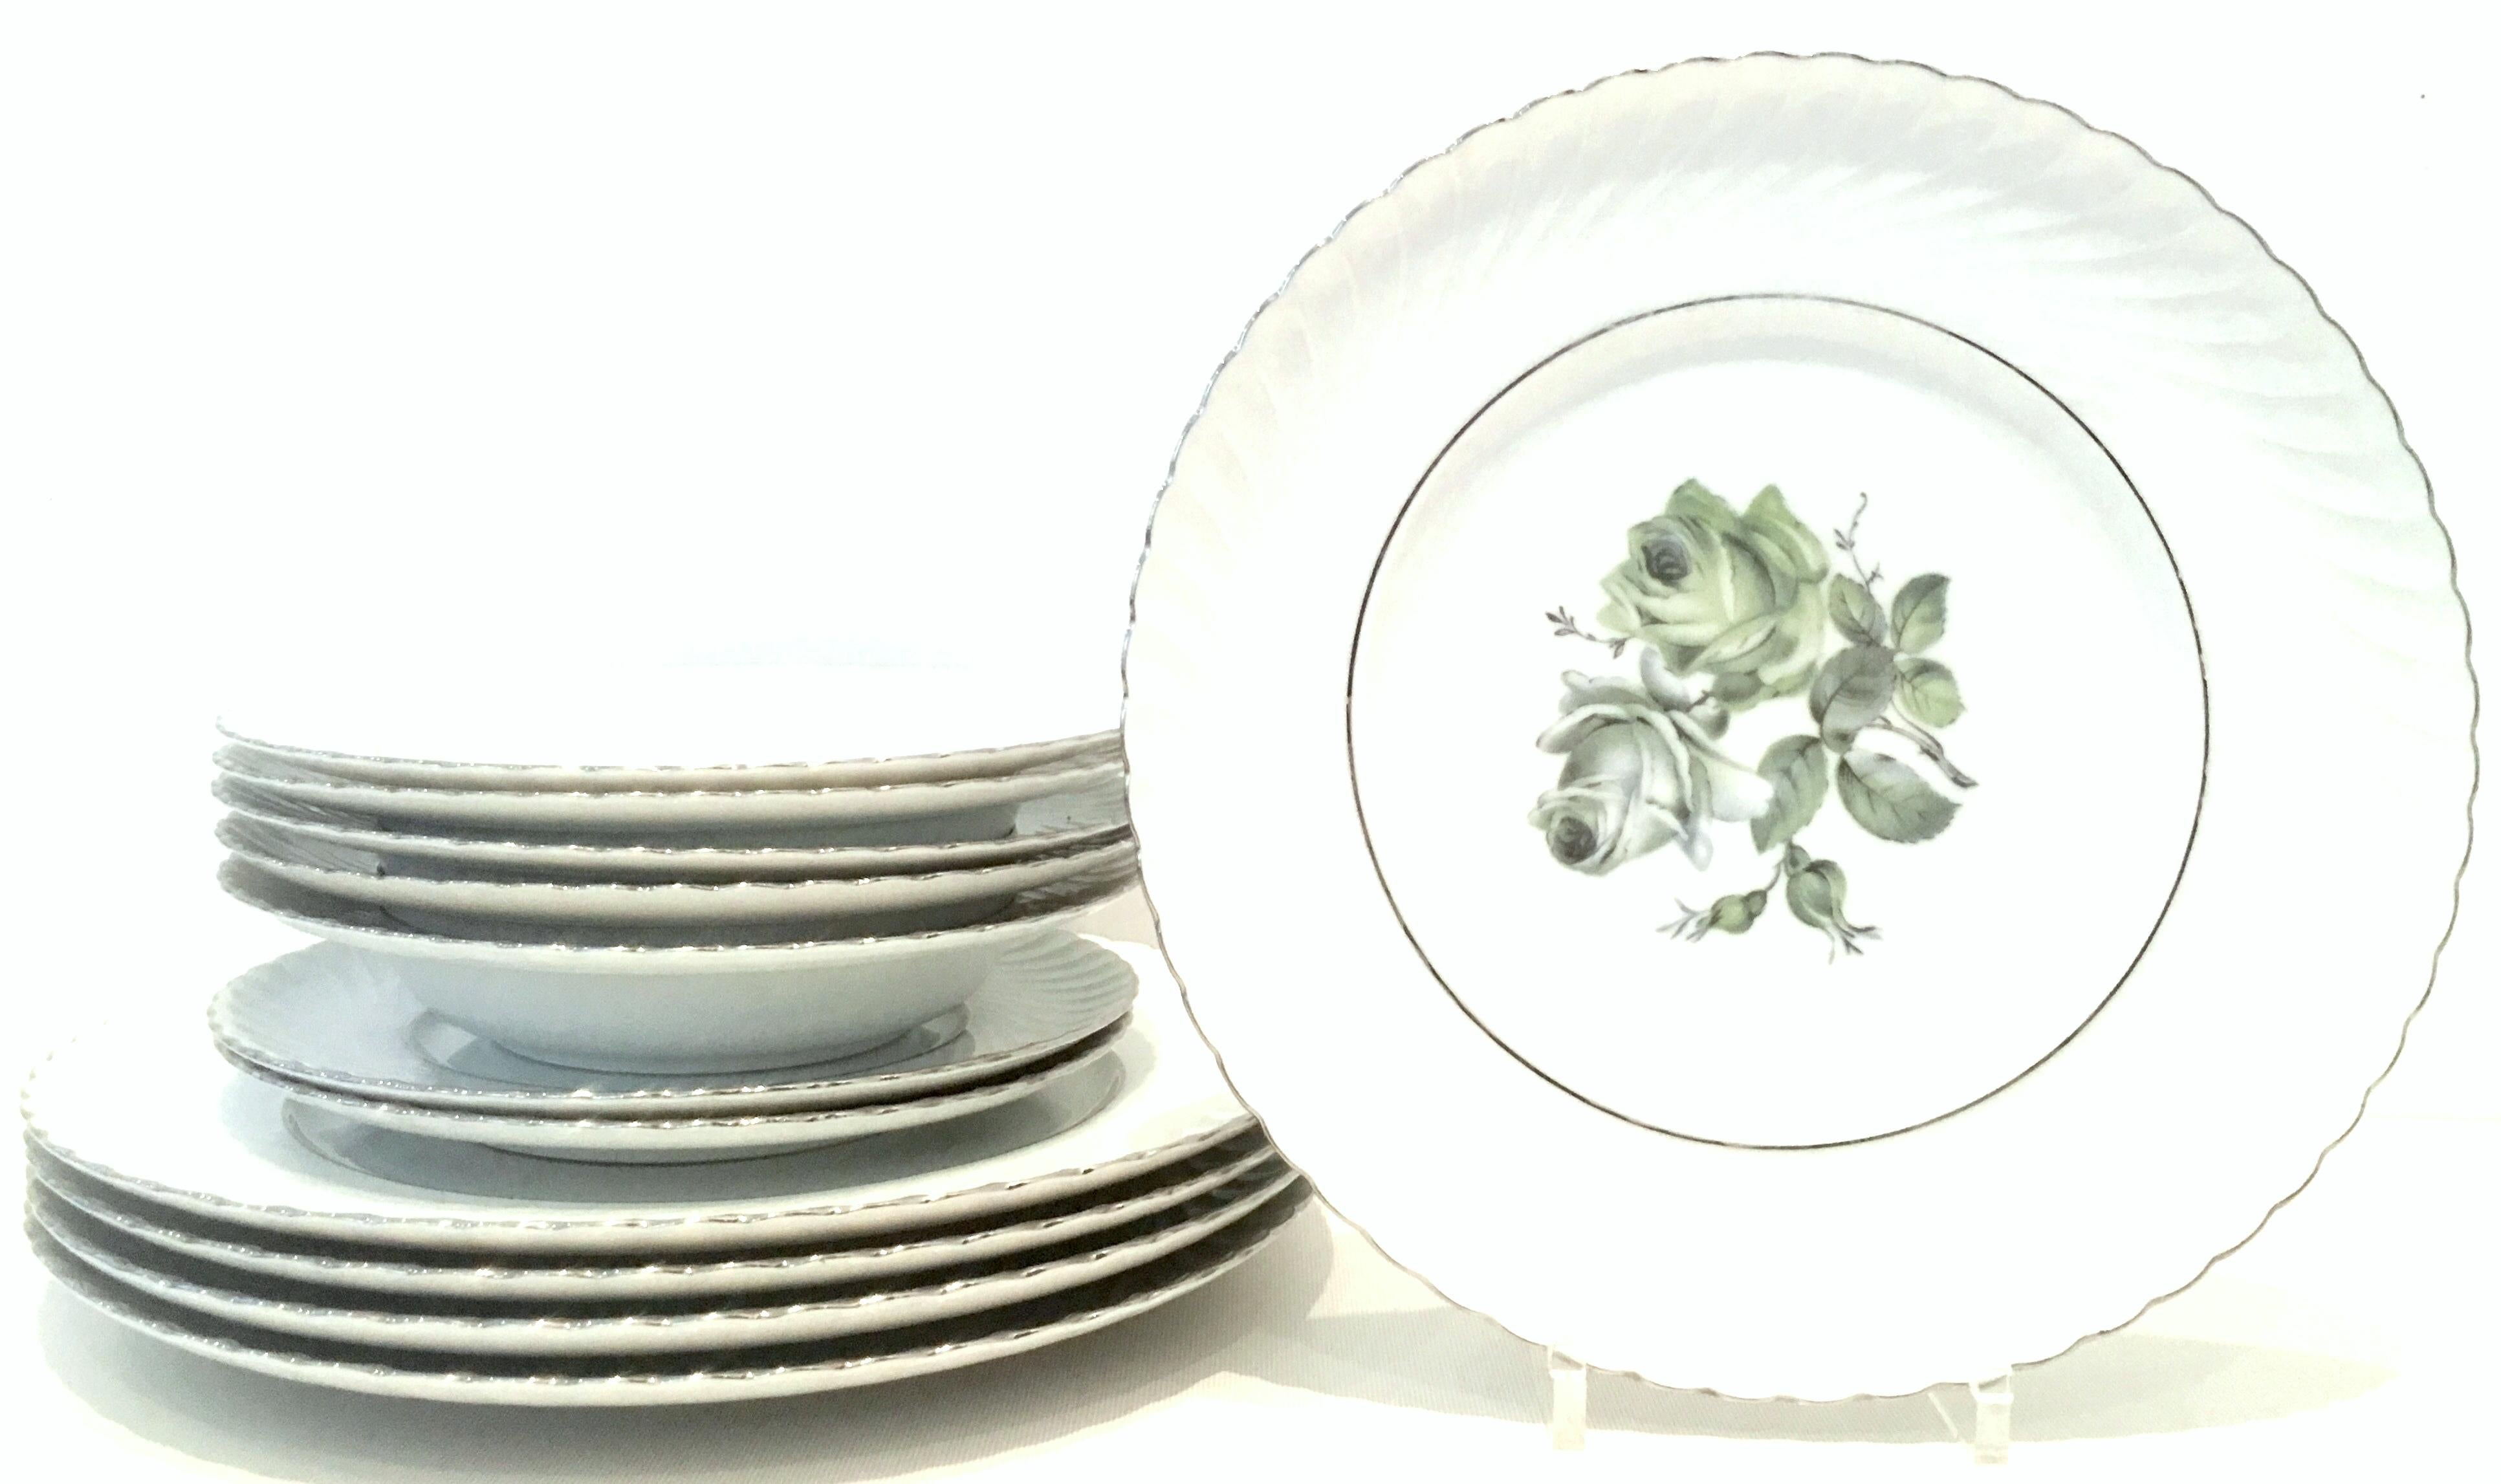 Mid-20th century German porcelain and platinum dinnerware set of twelve pieces by, Royal Tettau.. This German porcelain pattern by Royal Tettau features a bright white ground, swirled edge with a blue and green central rose motif and silver platinum